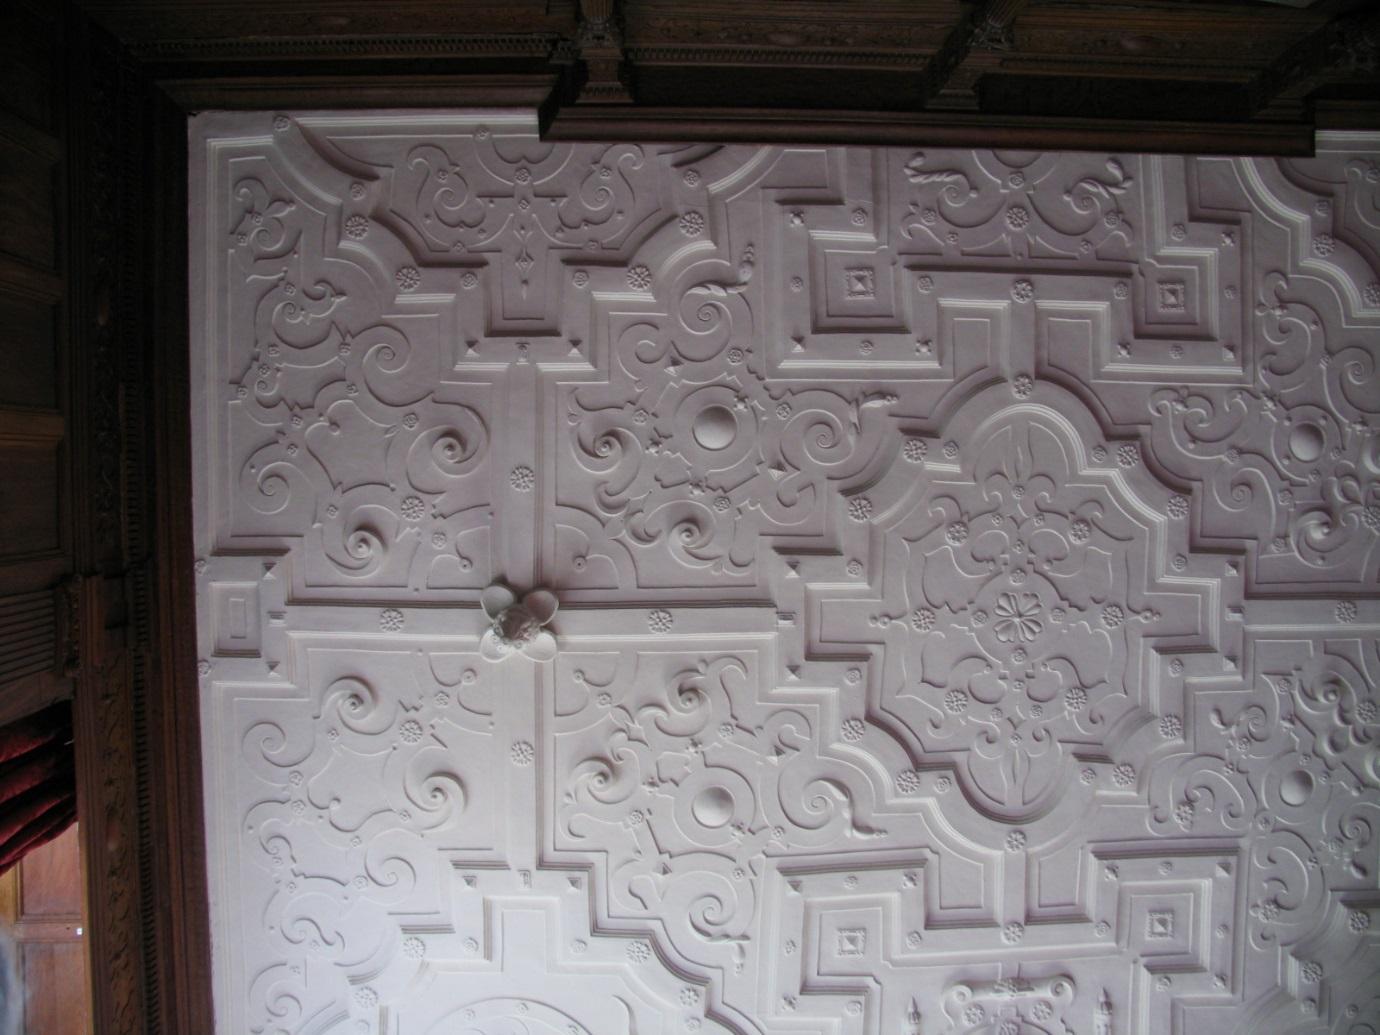 Chilham Castle, Kent, part of the Red Bedroom ceiling (c 1615)